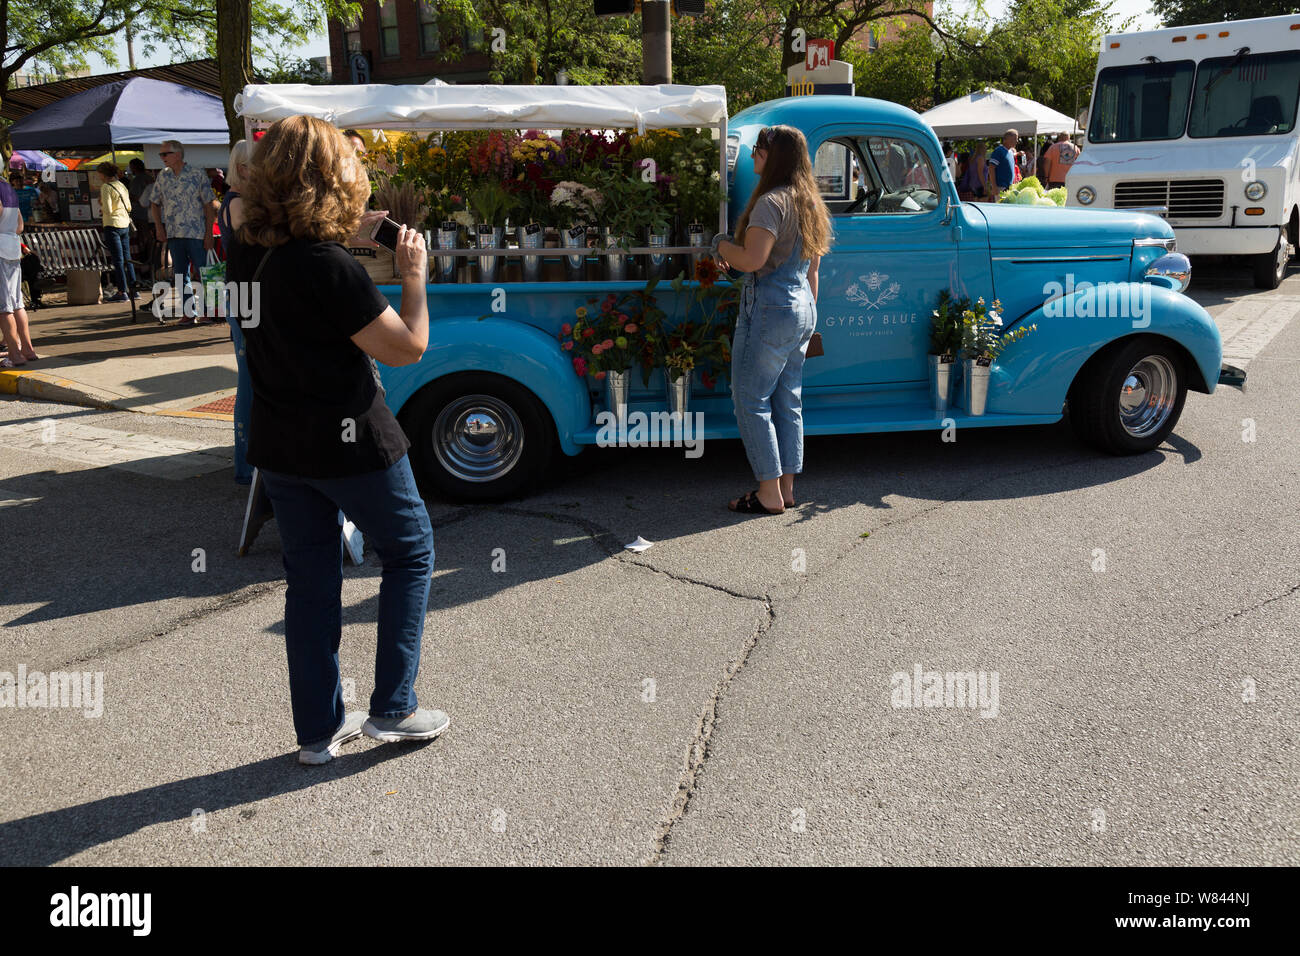 A customer photographs Gypsy Blue Flowers' beautiful classic flower truck at Fort Wayne's Farmers' Market in downtown Fort Wayne, Indiana, USA. Stock Photo